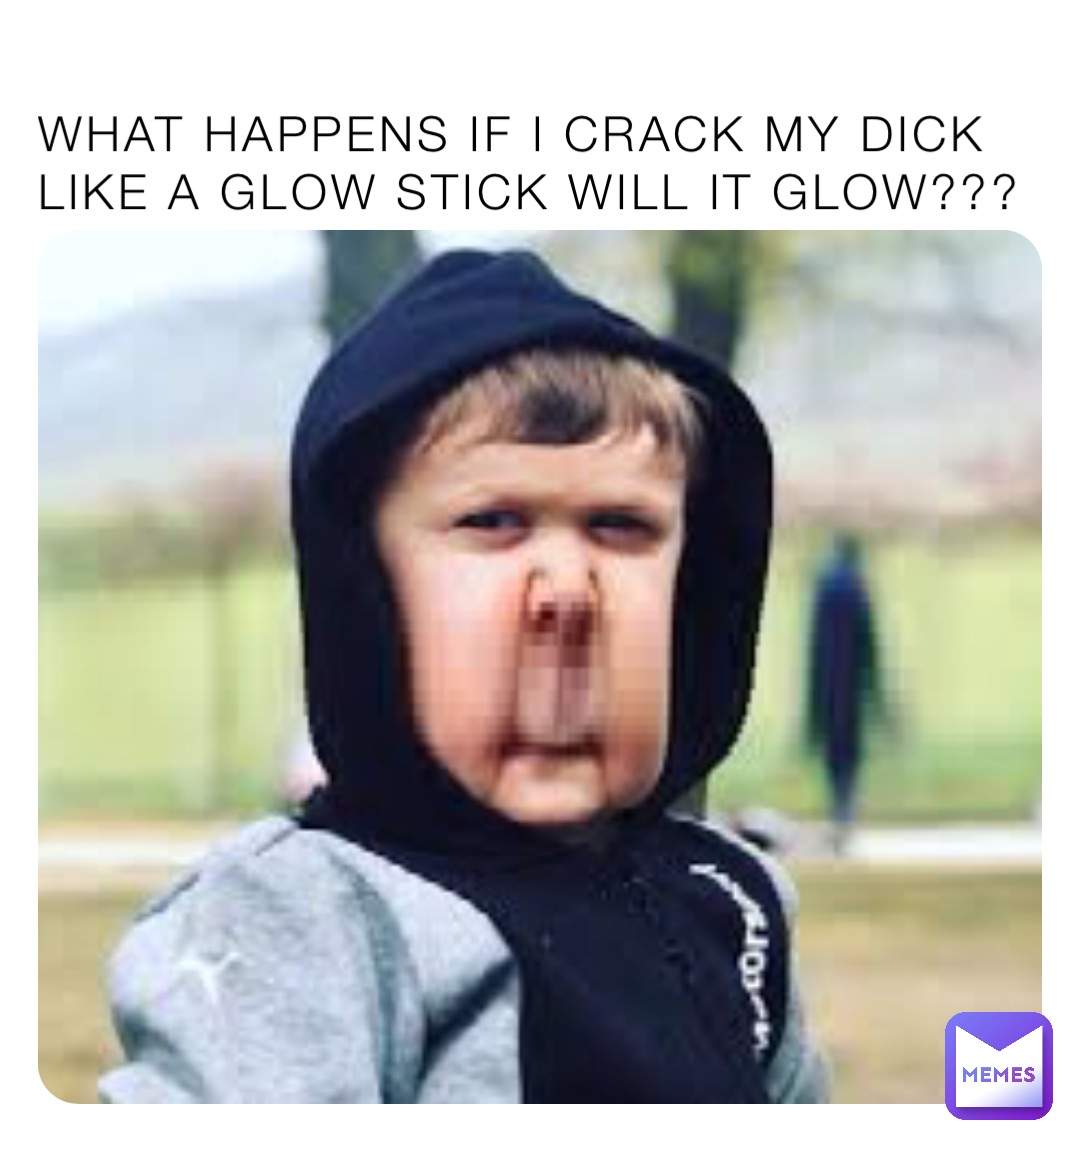 WHAT HAPPENS IF I CRACK MY DICK LIKE A GLOW STICK WILL IT GLOW???